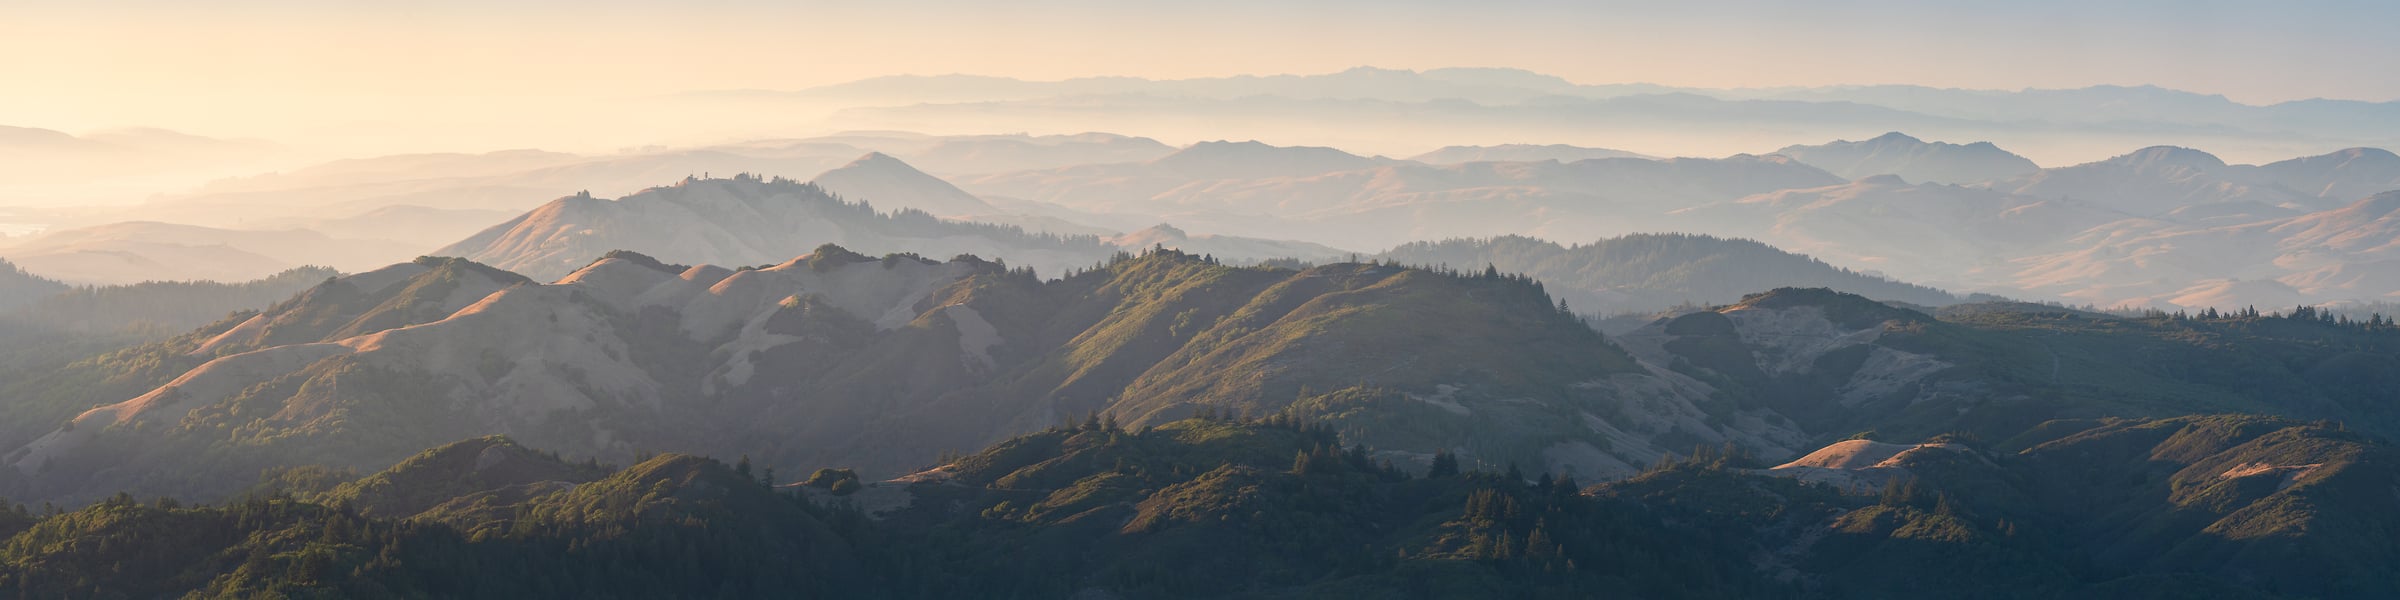 339 megapixels! A very high resolution, panorama photo print of the hills in Marin County at sunset; landscape photograph created by Jeff Lewis near Mt. Tamalpais in Marin County, California.